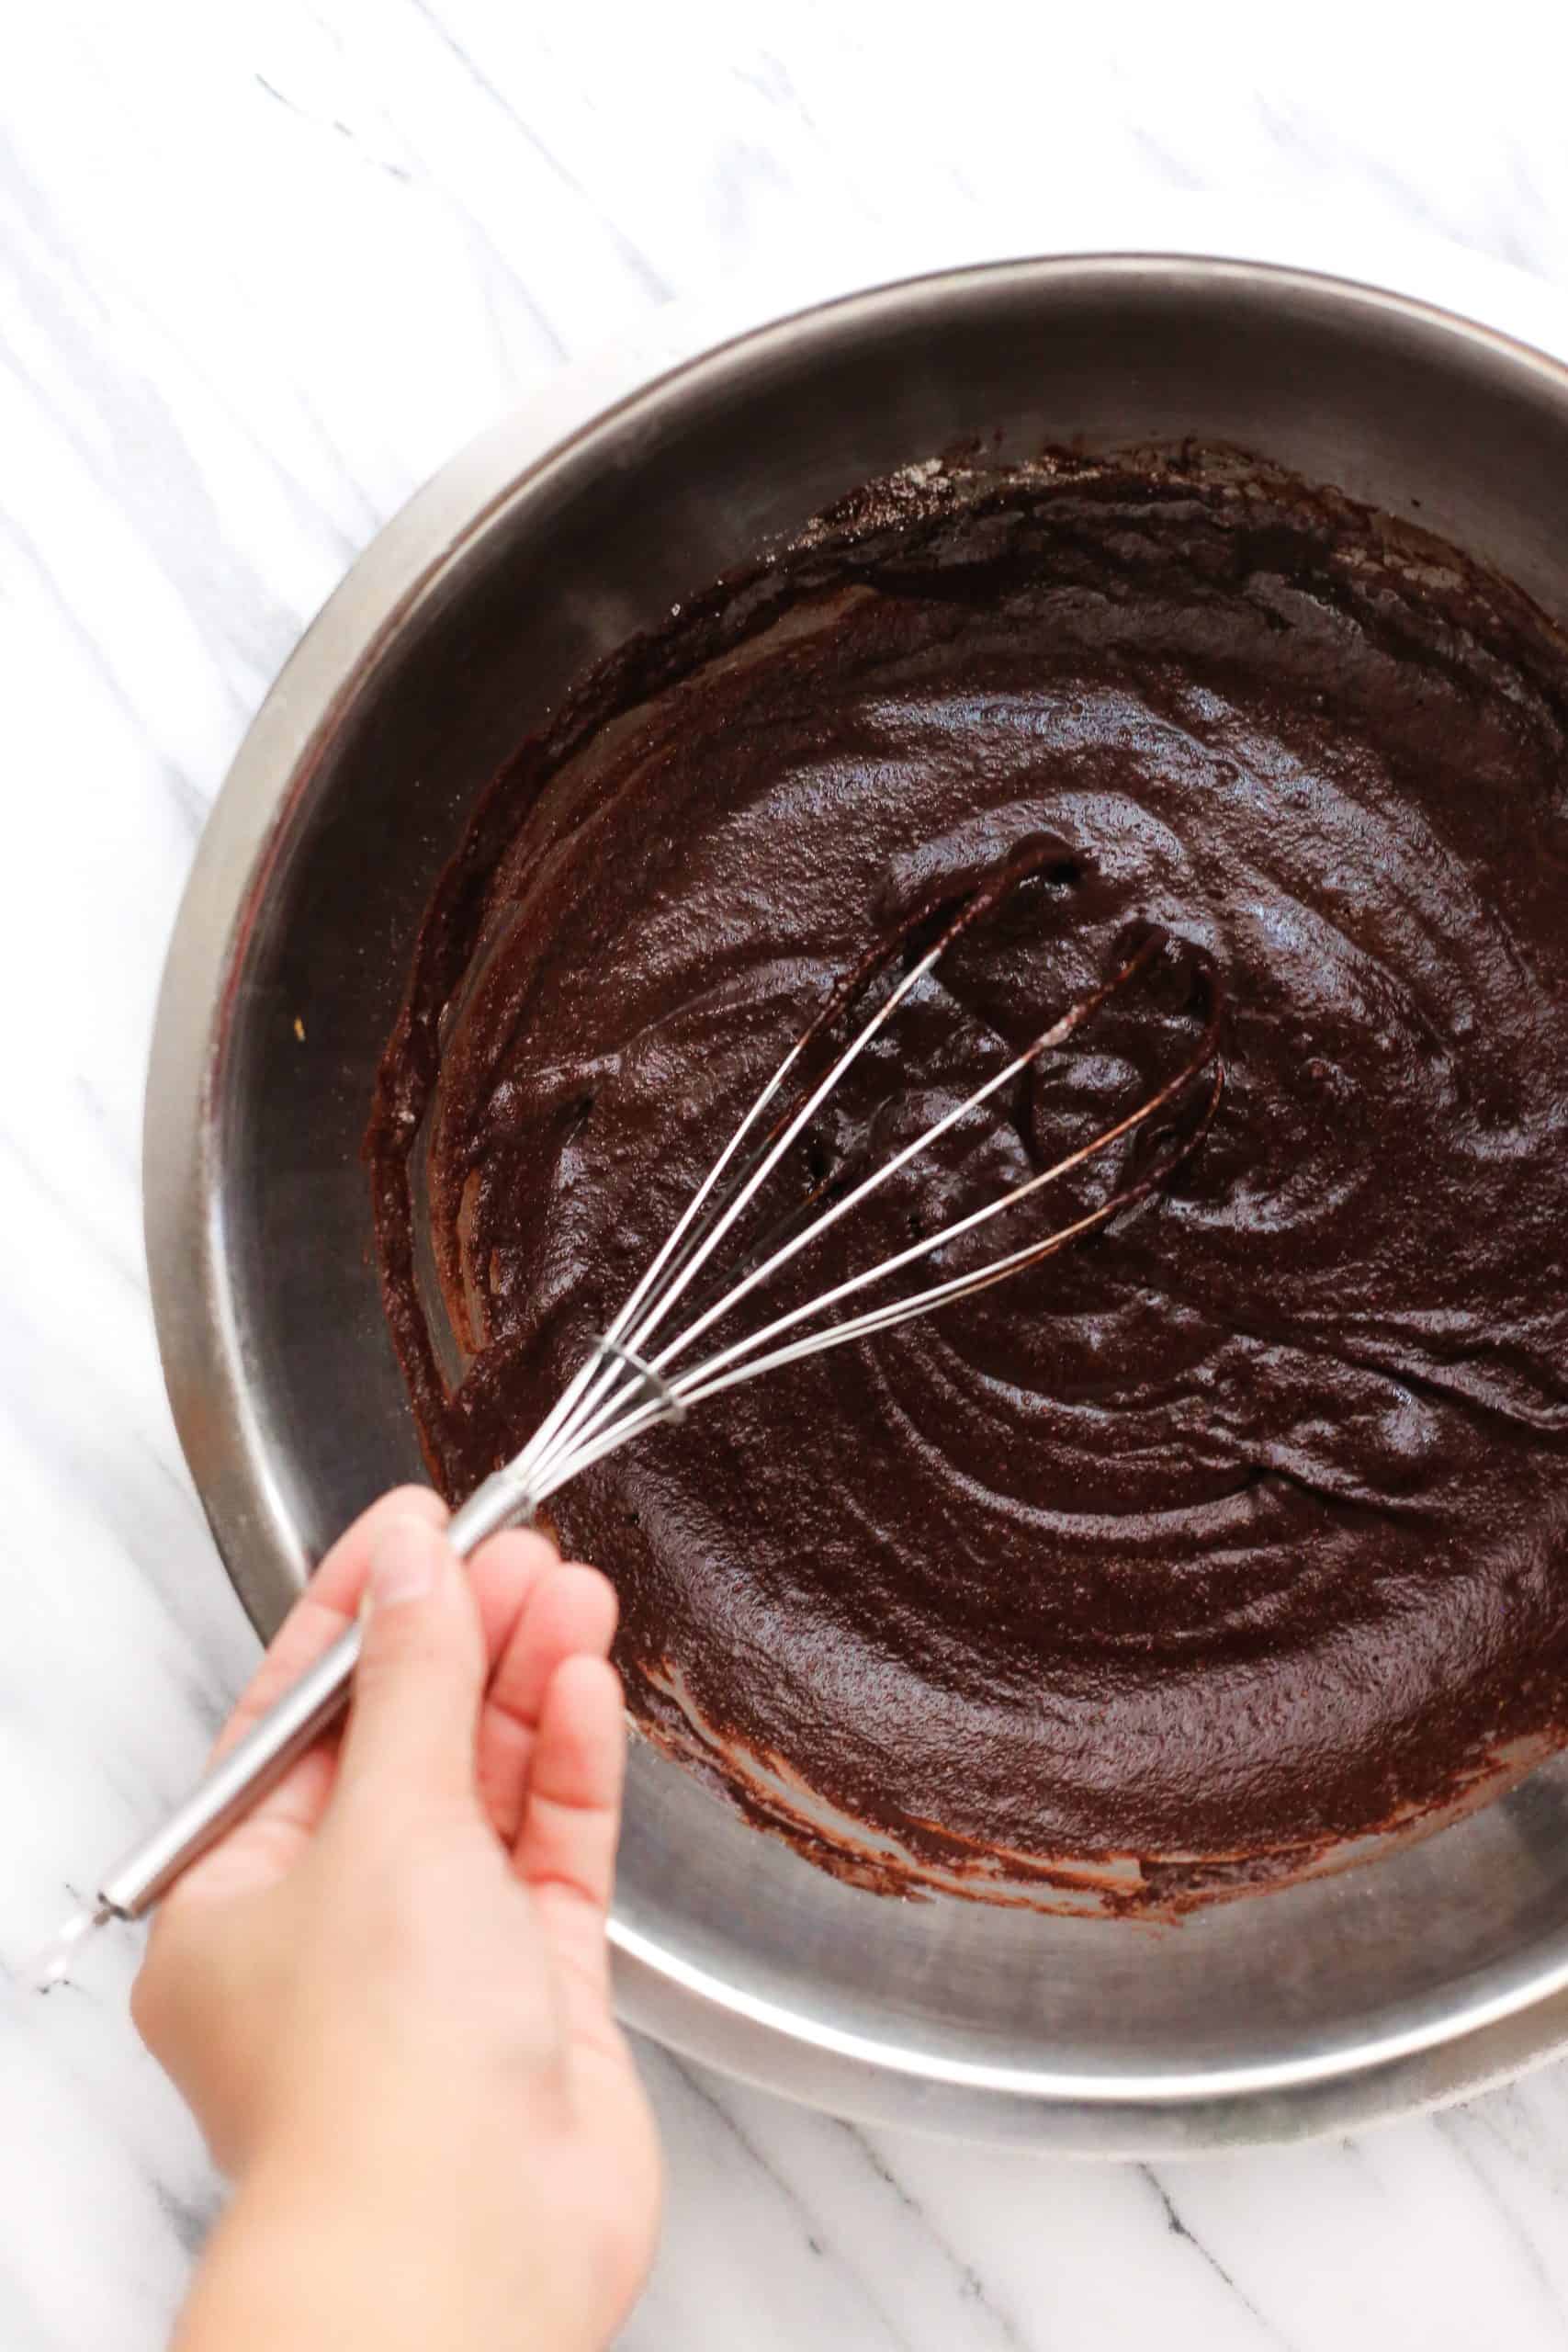 Whisking the flourless chocolate cake batter in a large metal bowl.